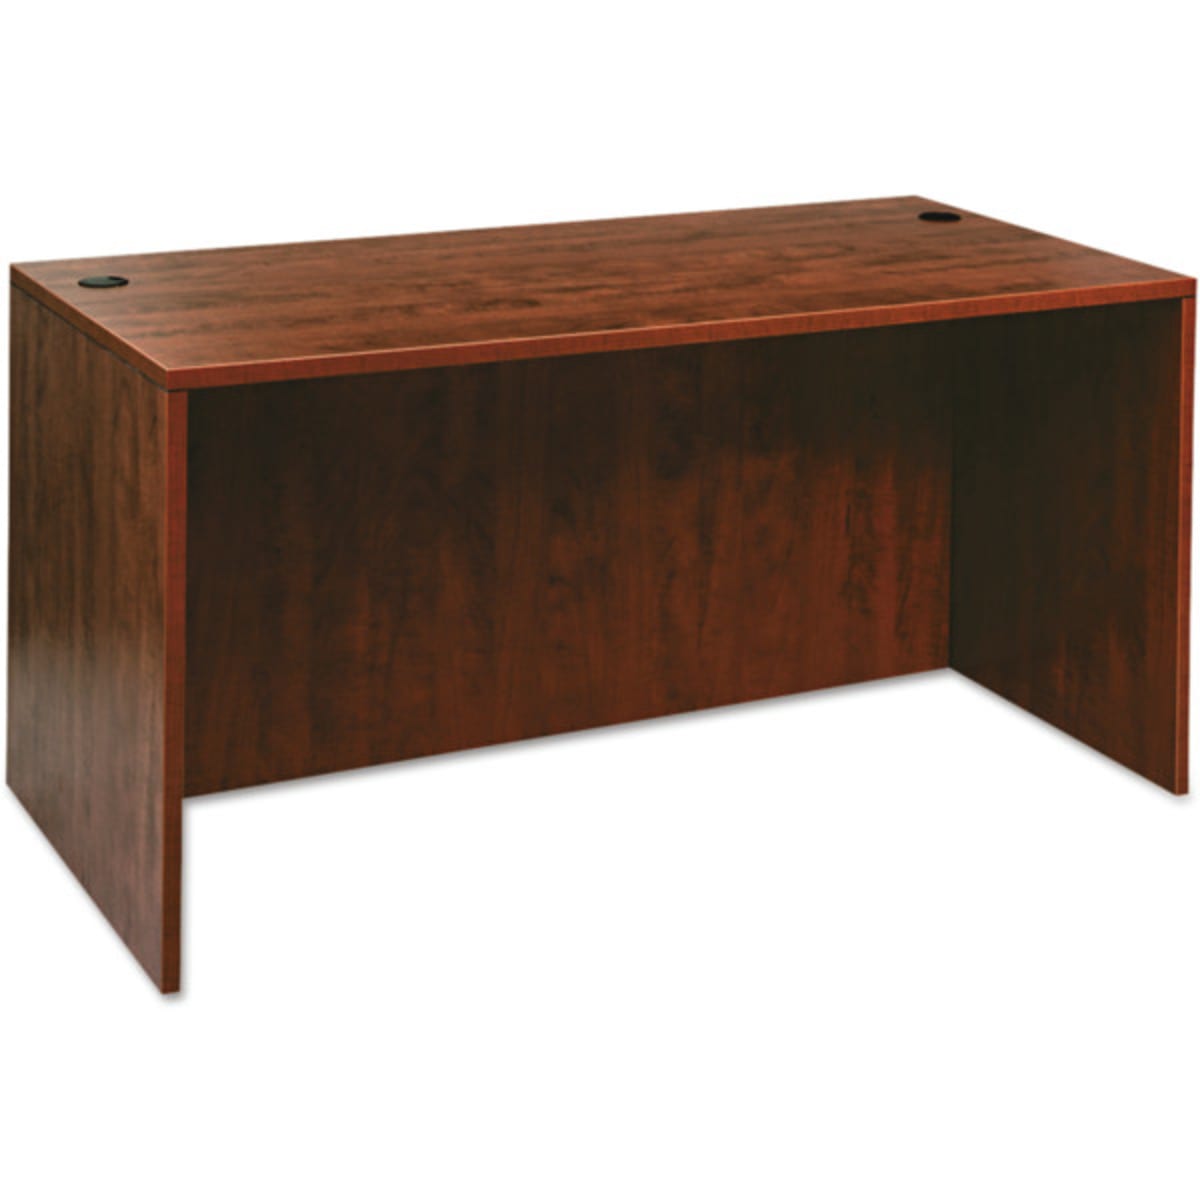 Realspace Cherry Landon Desk With Hutch Wd Of 5041 55 1 2 X 23